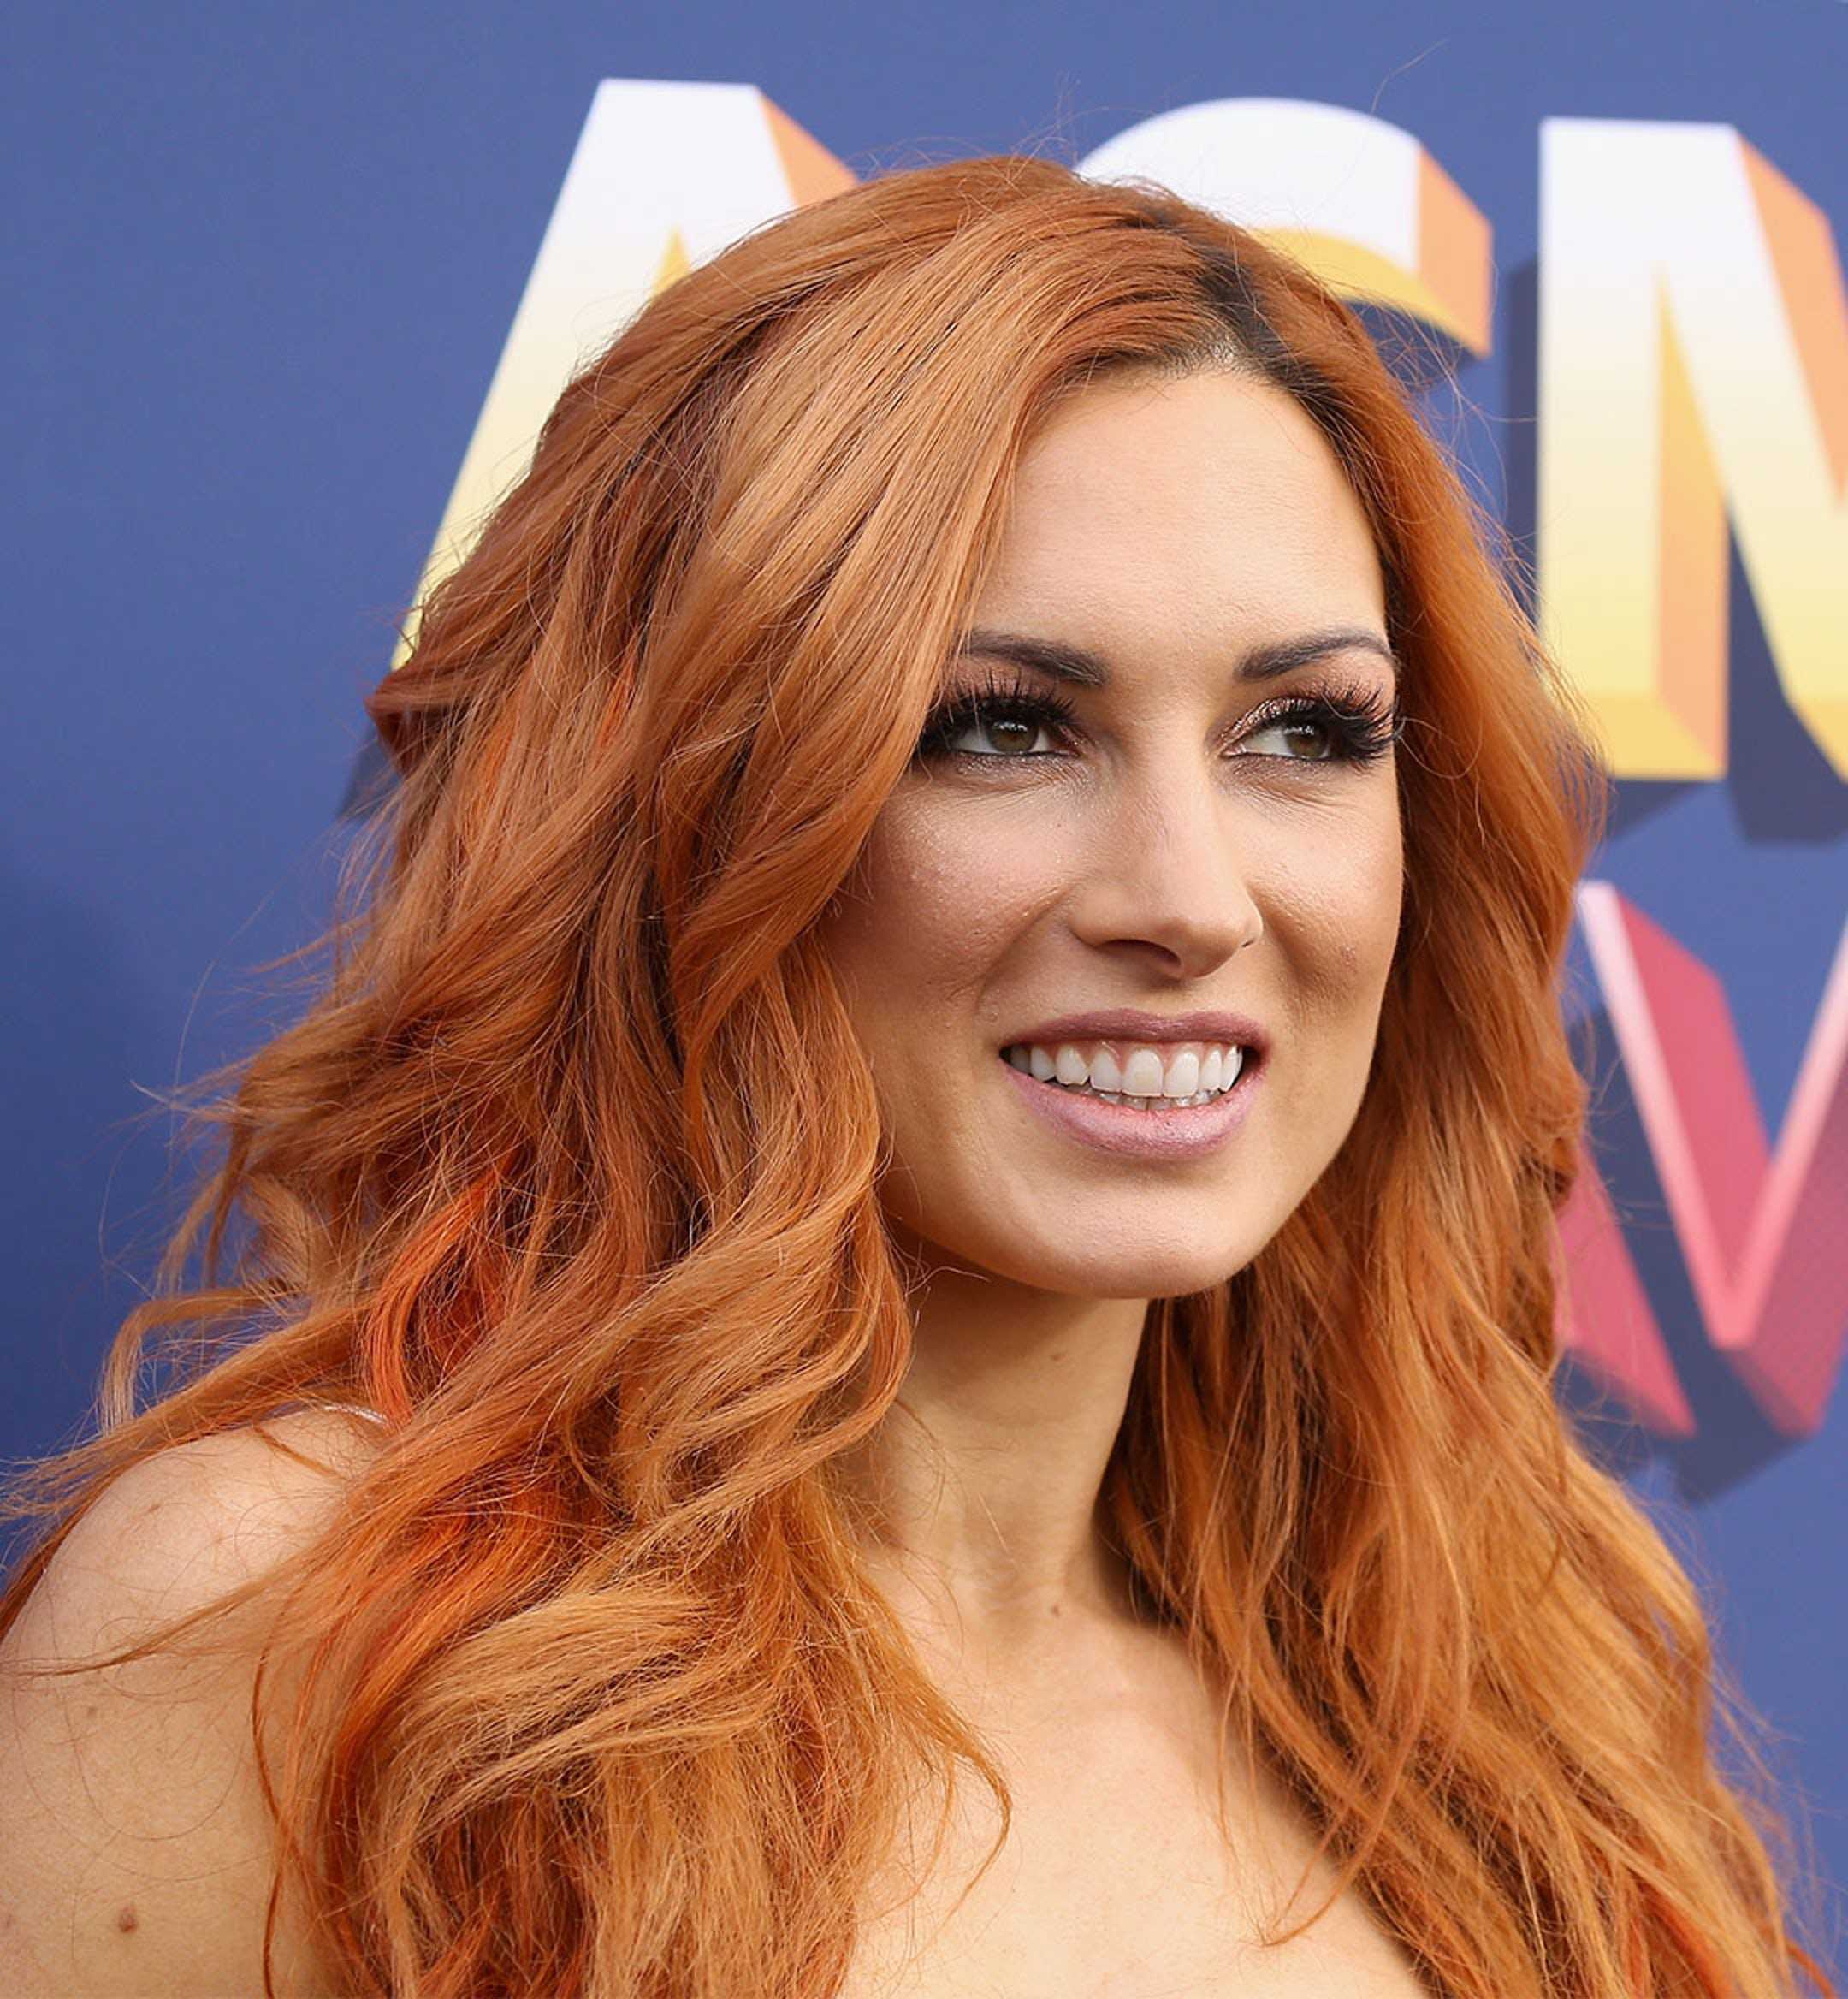 70+ Hot And Sexy Pictures of Becky Lynch – WWE Diva Will Sizzle You Up 125